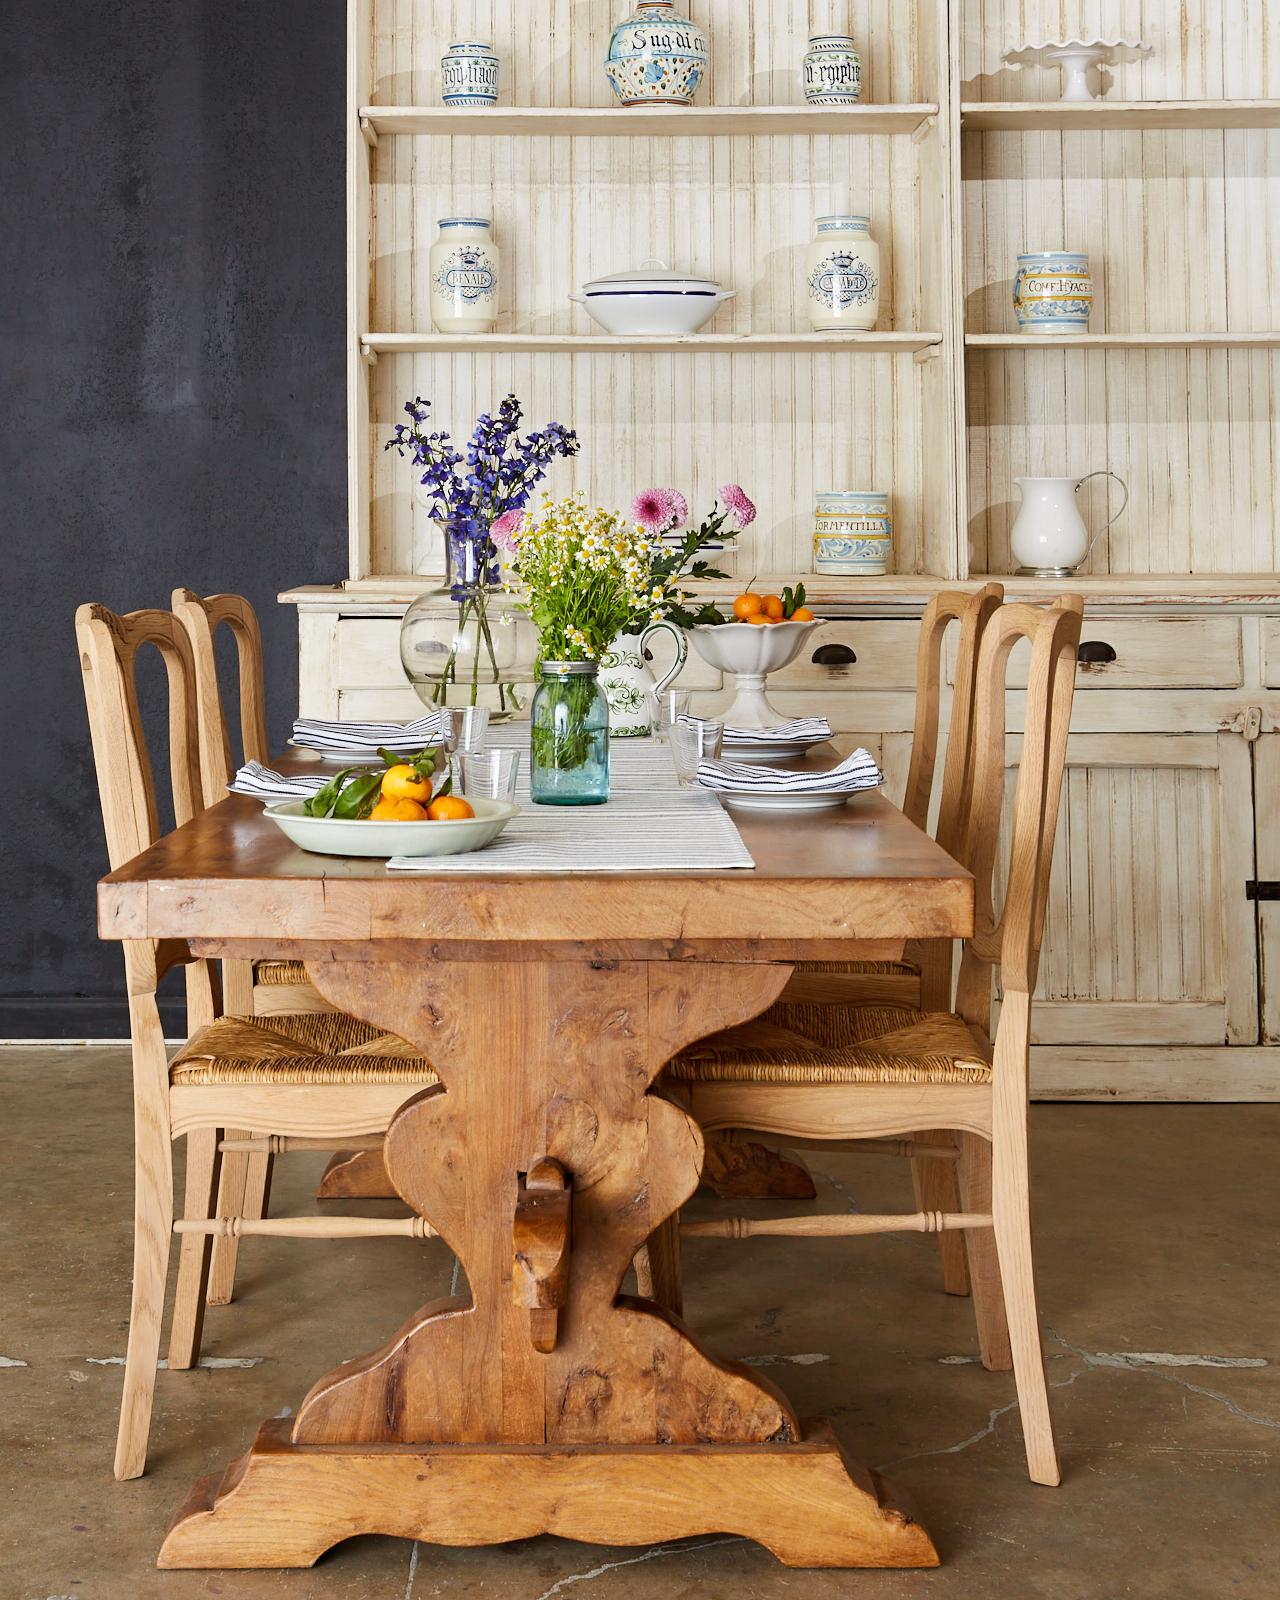 Magnificent 19th century country French farmhouse dining table crafted from Elm timbers. The trestle style table features a 2.25 inch thick plank top showcasing the amazing elm grain patterns with burls and knots. The thick top is supported by